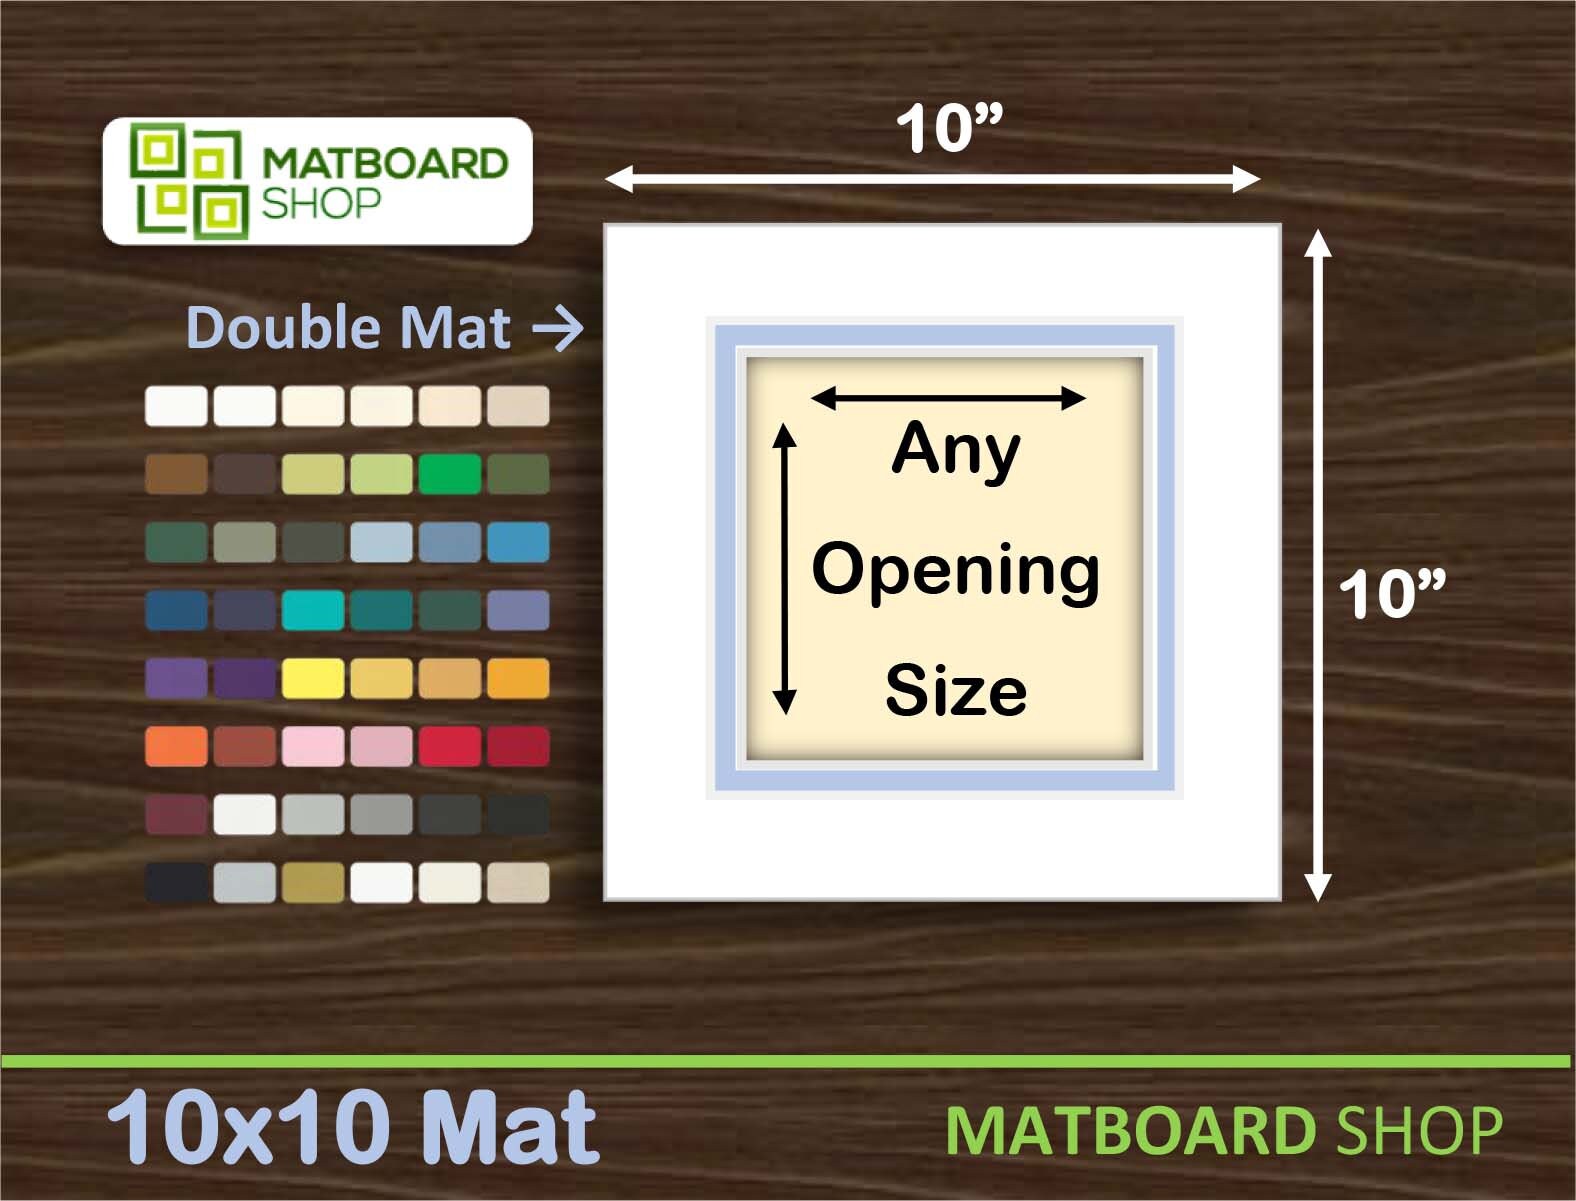  Mat Board Center, Pre-Assembled Mat Frames with Plastic Bags,  Acid-Free, Slip-in Design, 8x10 for 5x7 Pictures (White, 10-Pack)